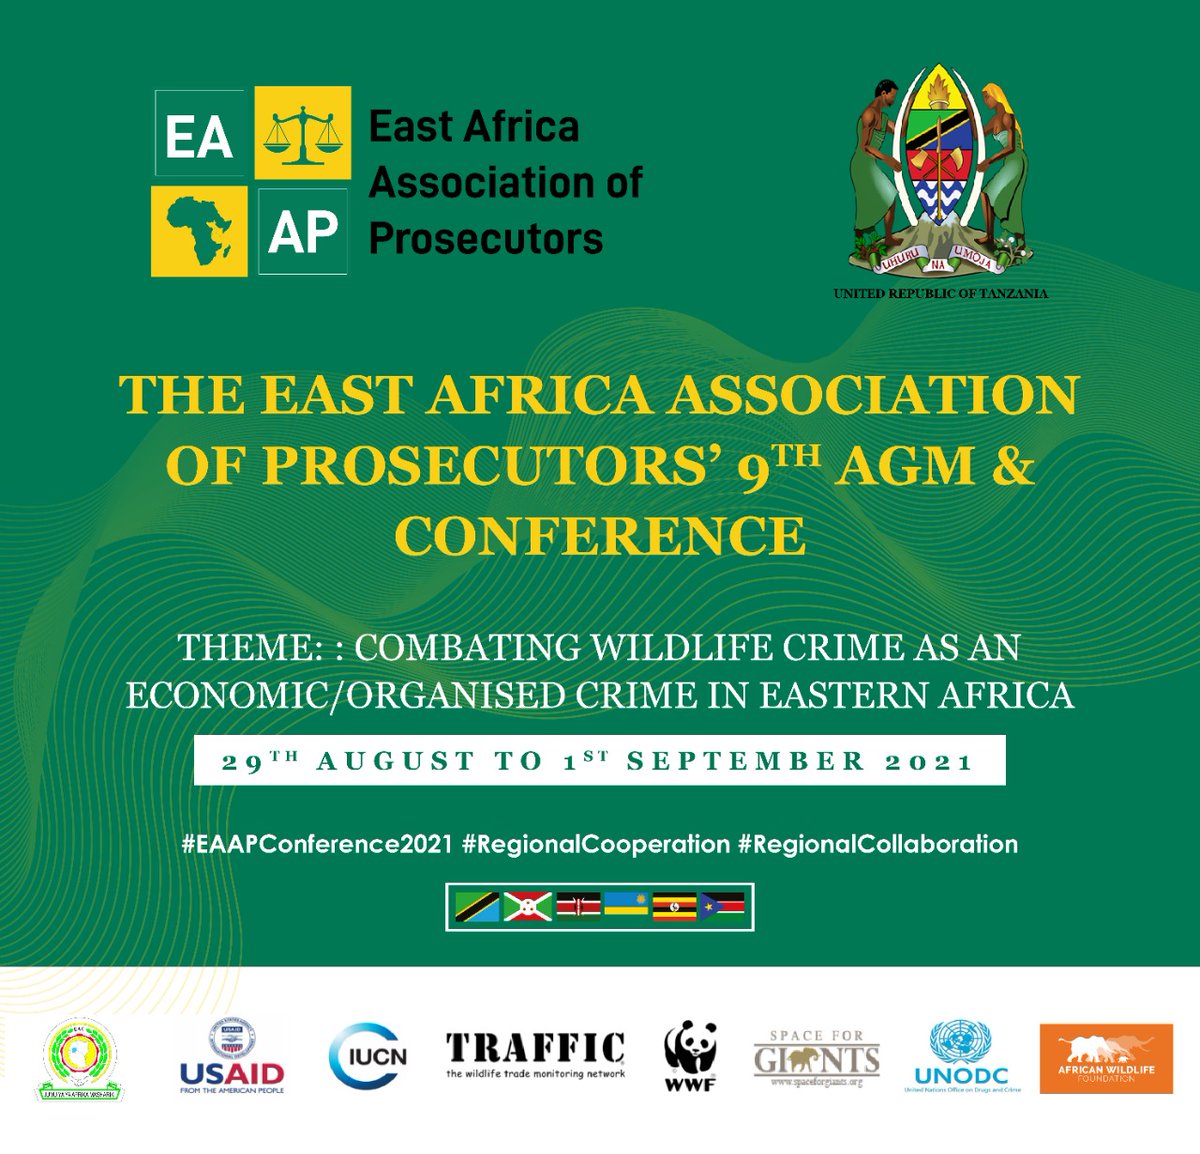 The EAAP  🇧🇮🇰🇪🇸🇸🇷🇼🇹🇿🇺🇬takes the opportunity to welcome all delegates 🇩🇯🇨🇩🇪🇹🇲🇼🇲🇿🇿🇲arriving today for the EAAP Conference that starts tomorrow in Arusha, Tanzania. #EAAPConference2021 #RegionalCooperation #RegionalCollaboration #EndWildlifeCrime